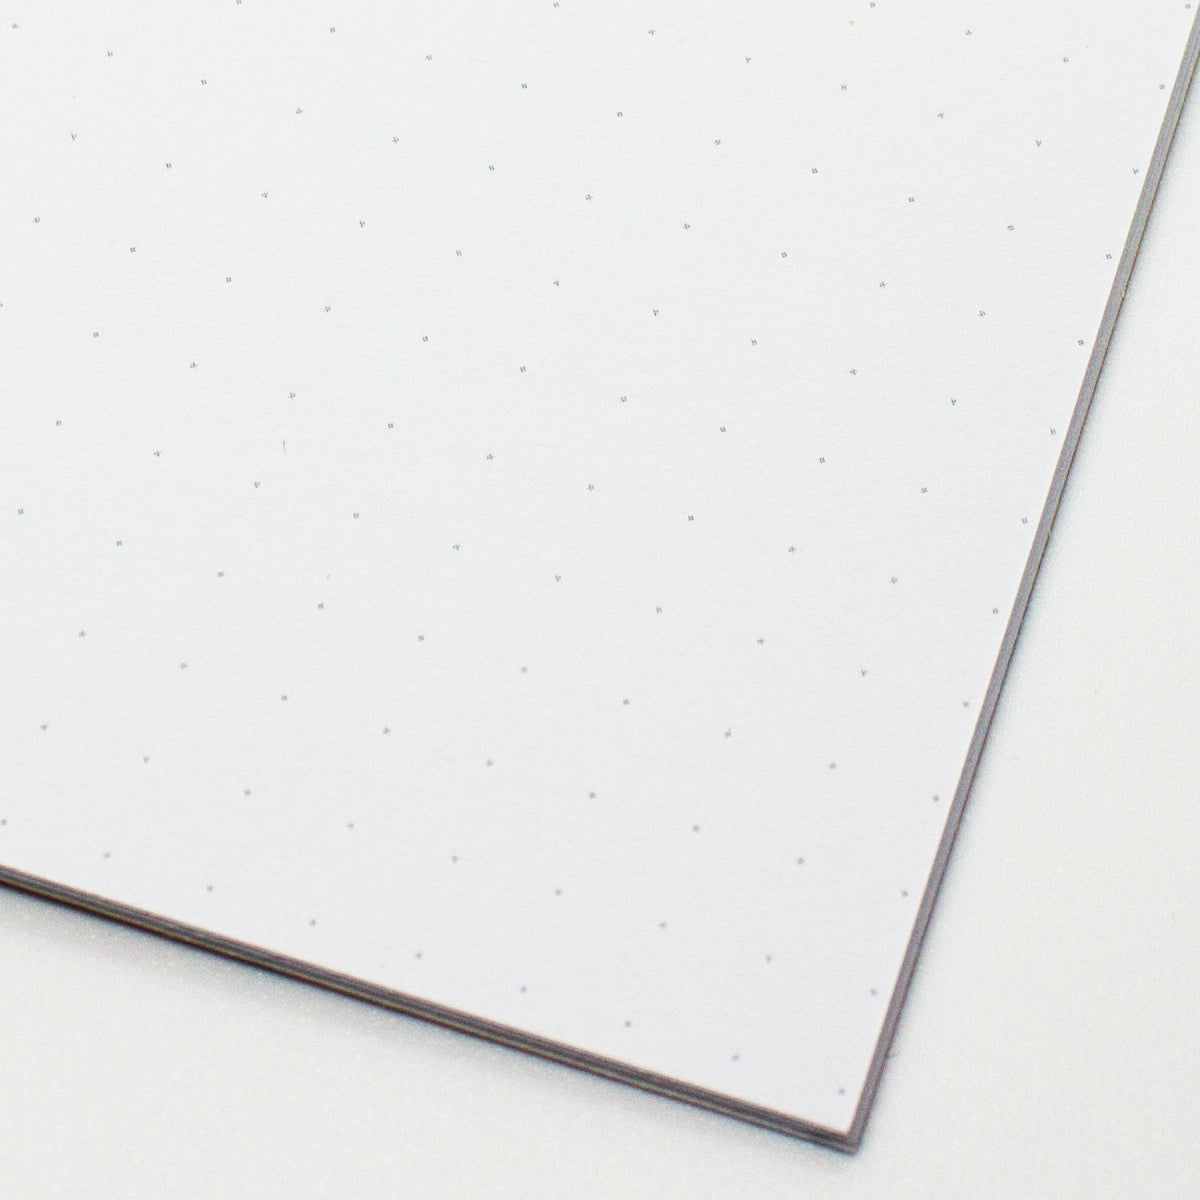 Notes Notebook Set of 2 - Dot Grid & Ruled